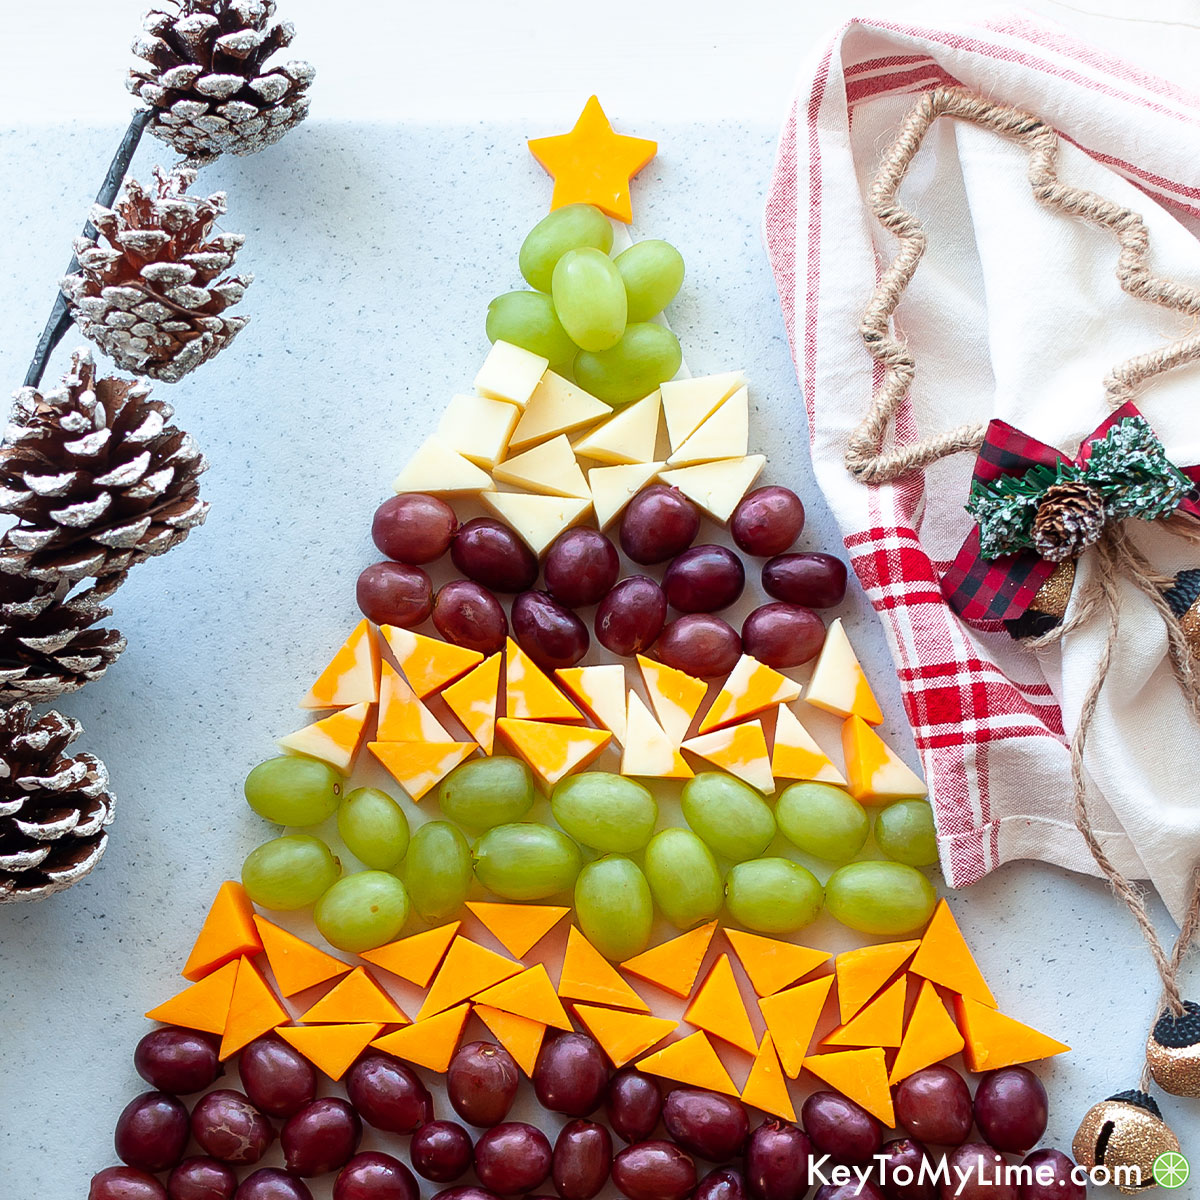 A holiday cheese platter surrounded by pine cones and a red plaid napkin.